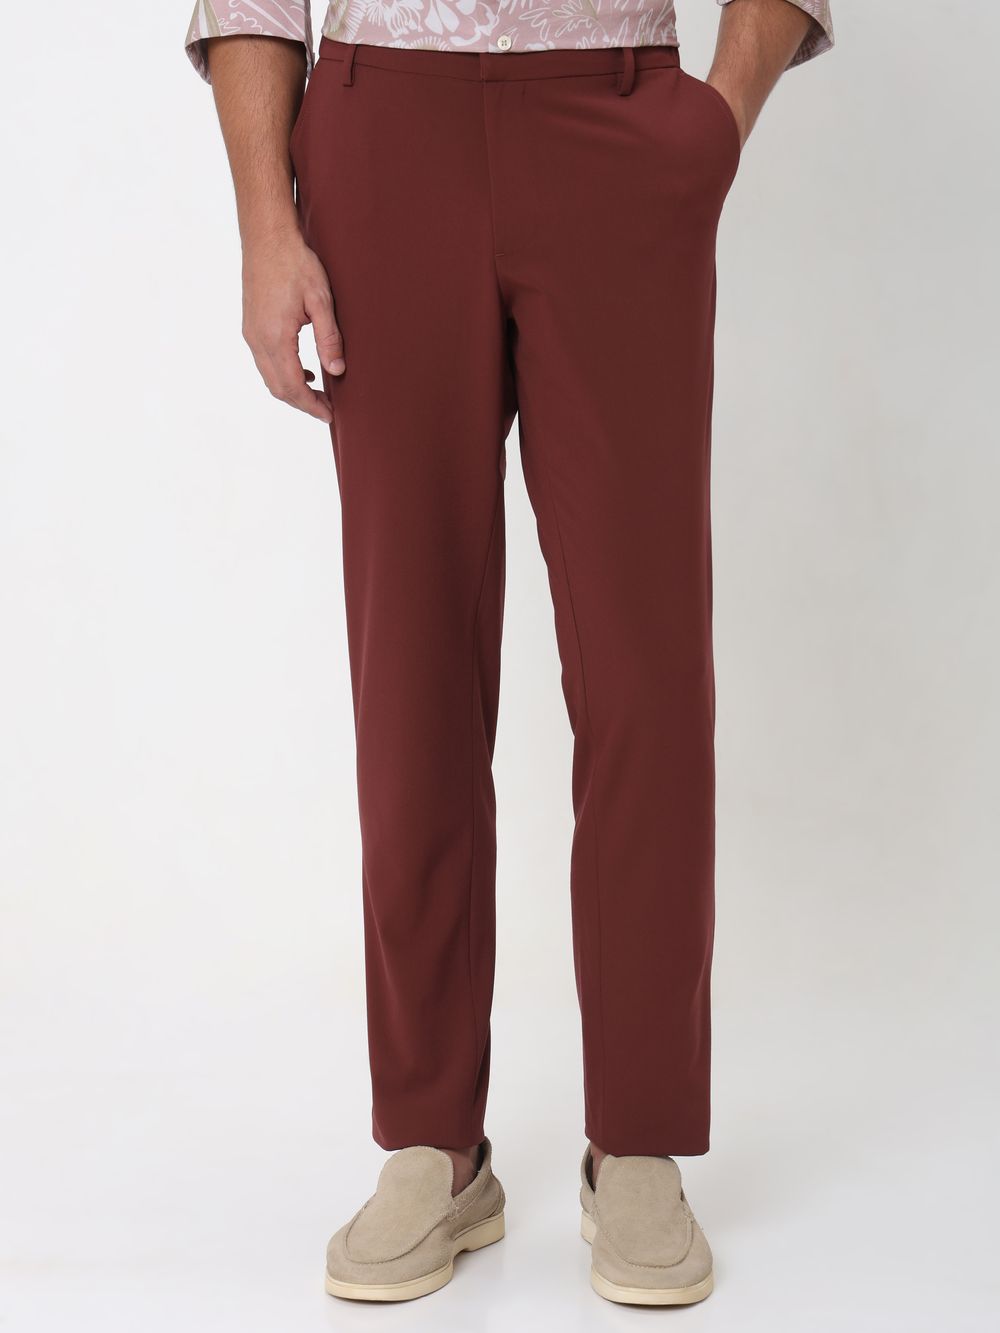 Rust Ankle Length Stretch Chinos